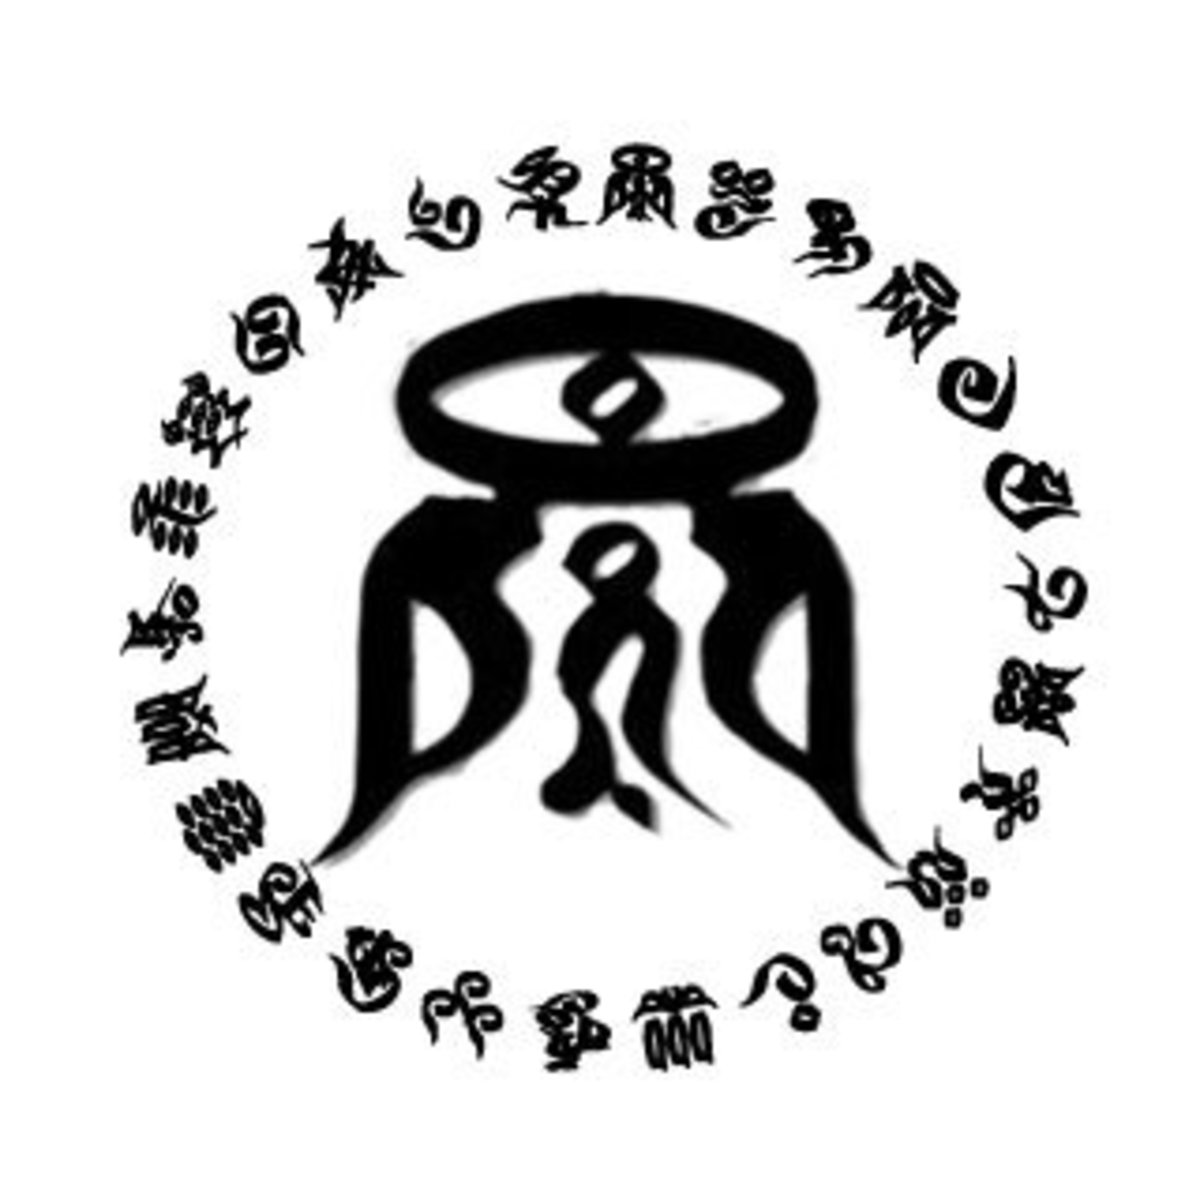 The symbol of Yevon, surrounded by the glyphs that make up the Spiran language